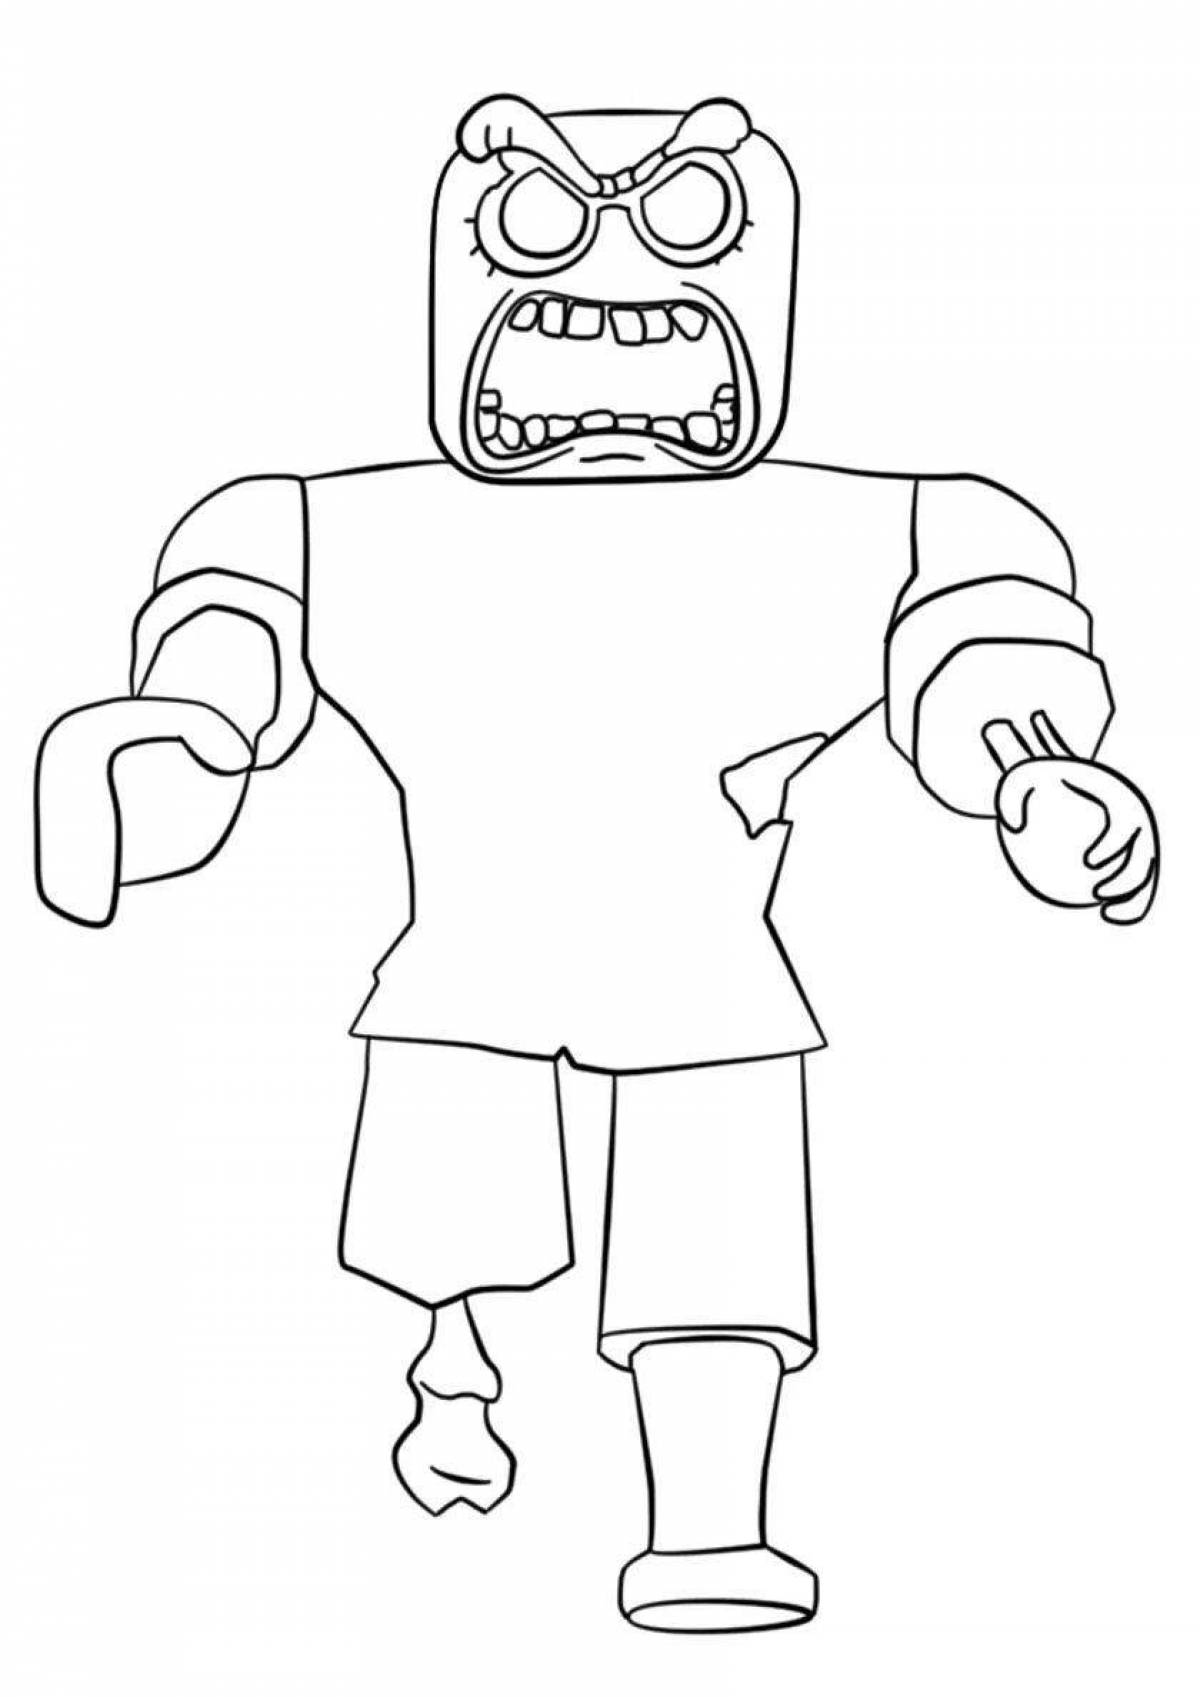 Adorable roblox characters coloring book